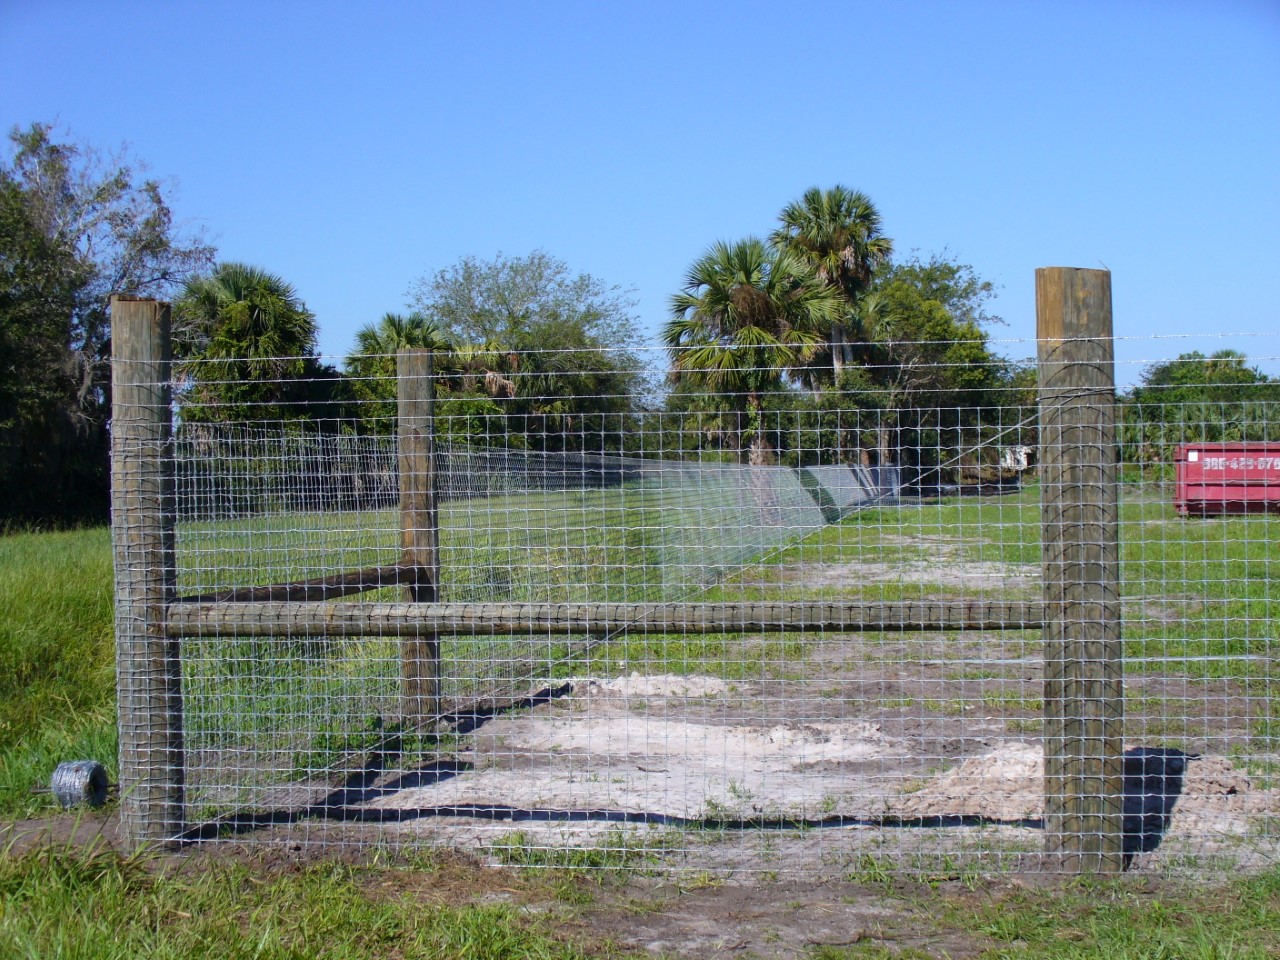 High Tensile Wire Fence: All You Want to Know